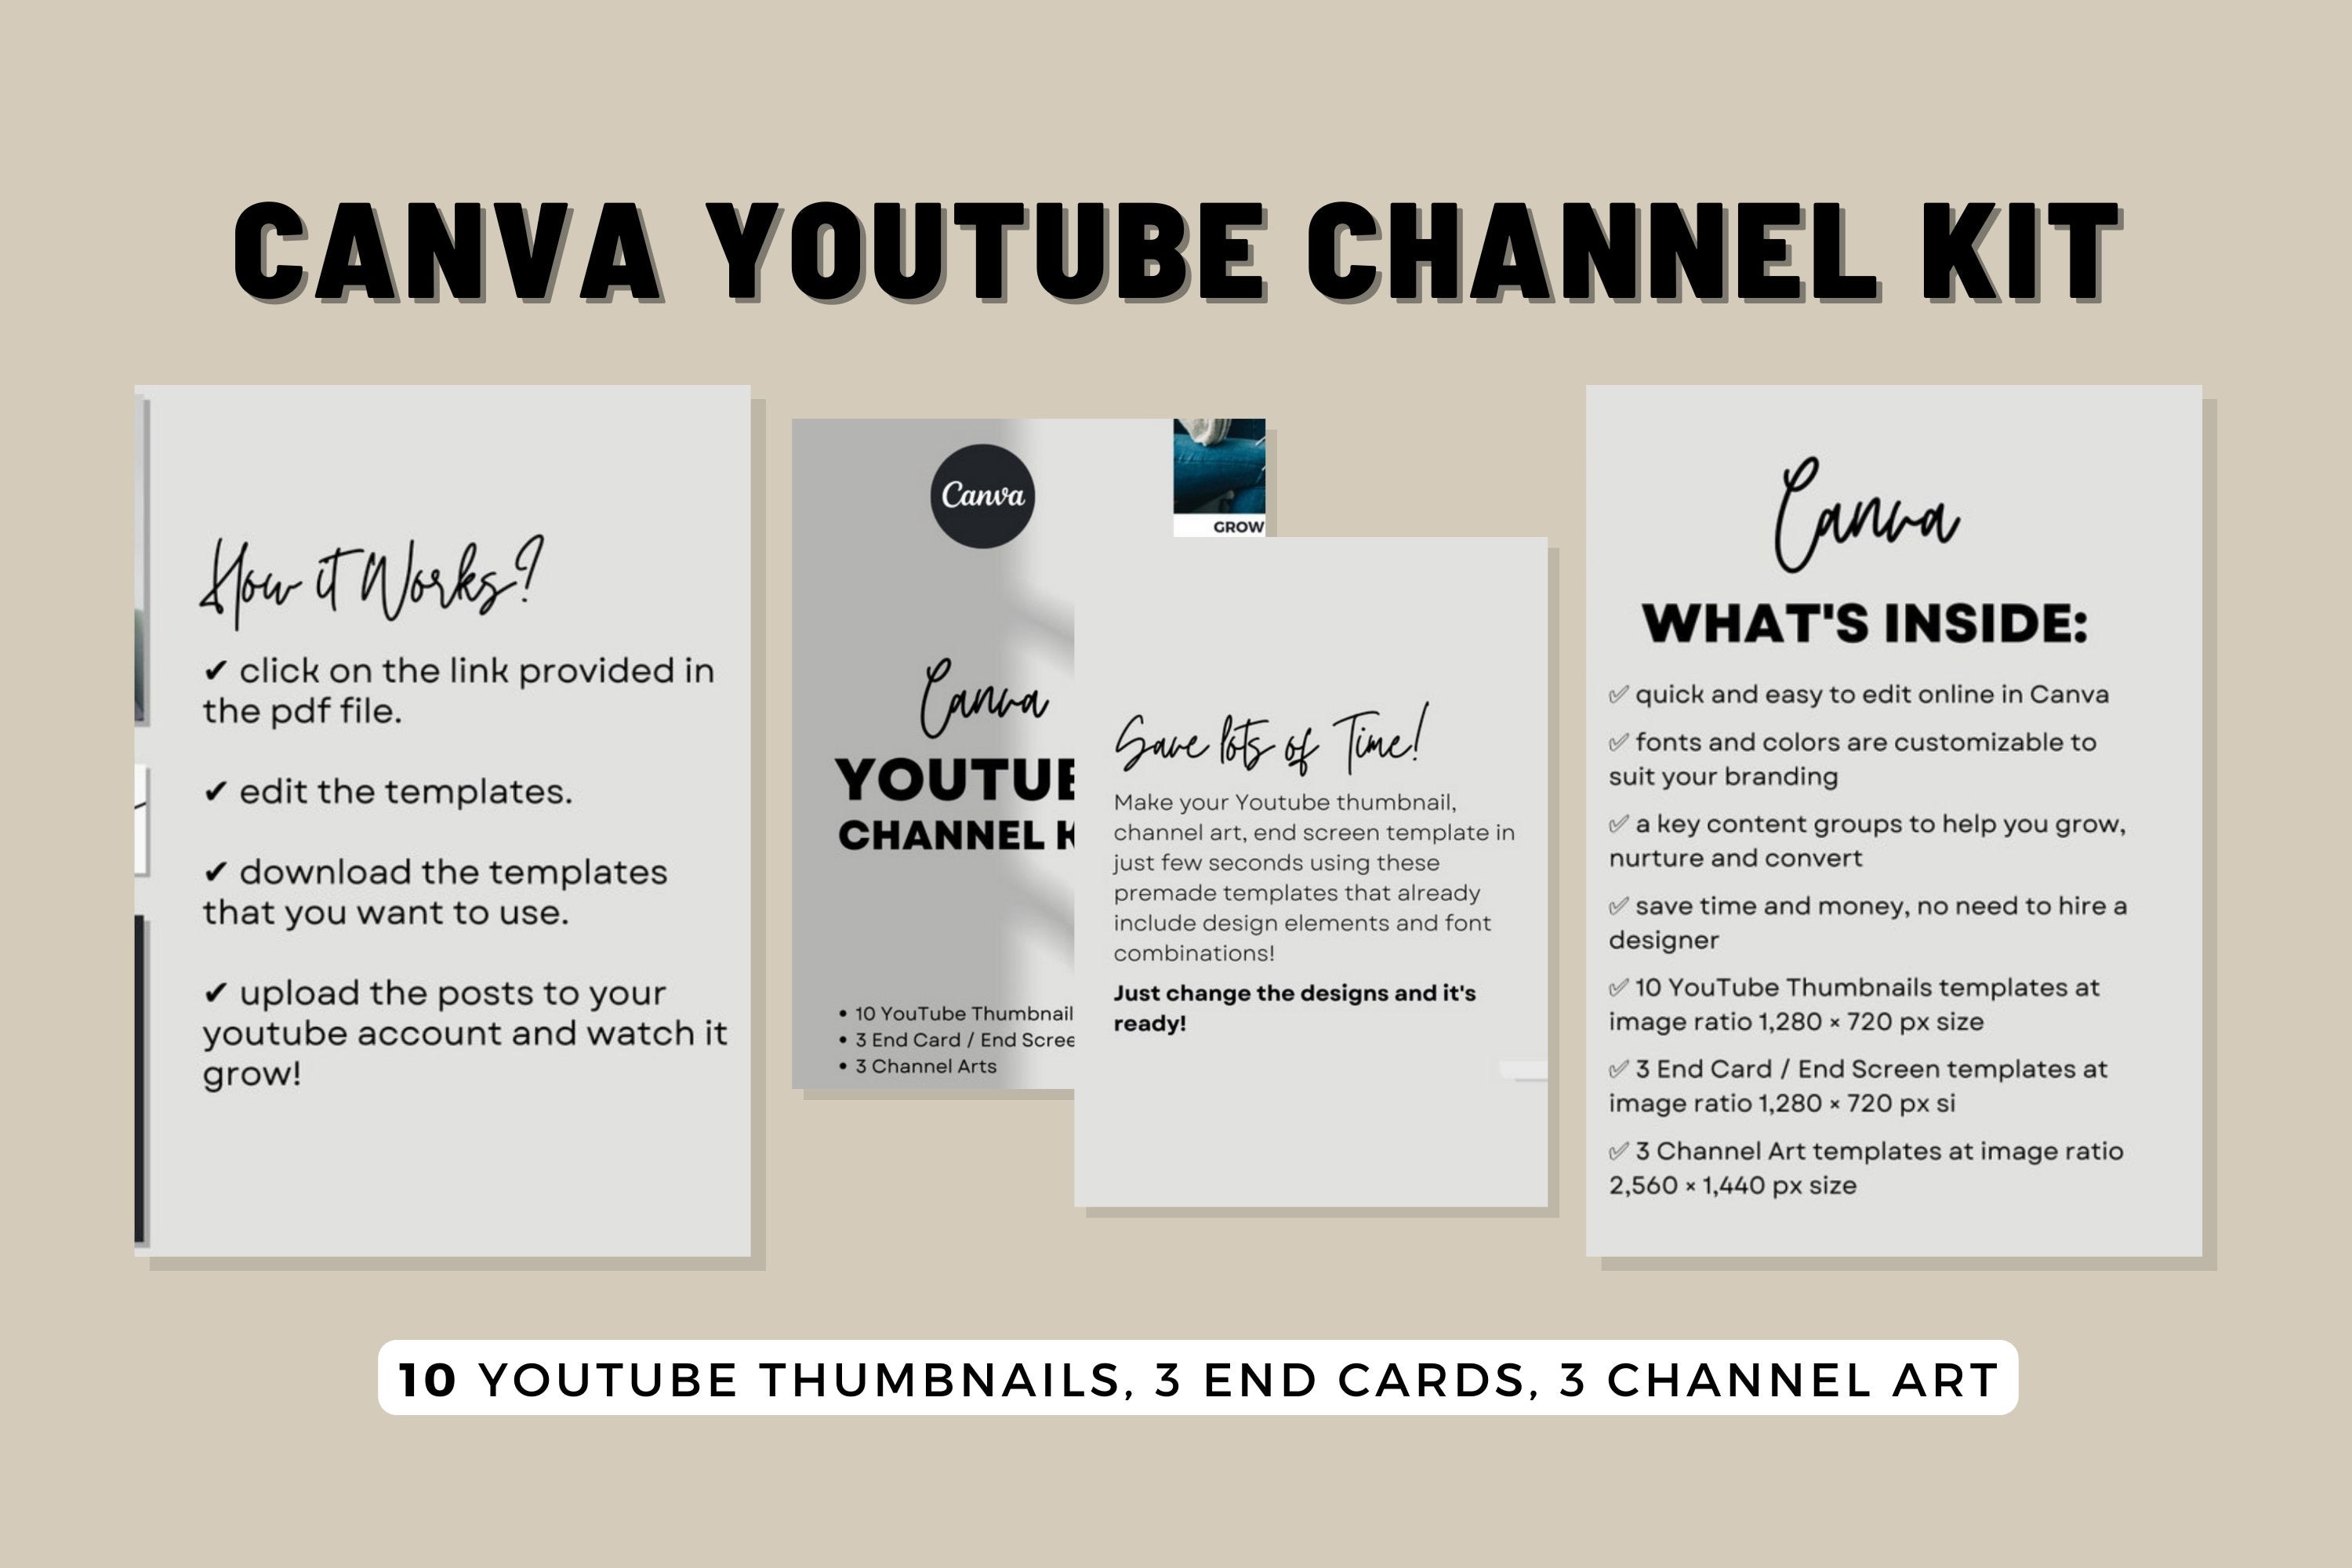 YOUTUBE CHANNEL KIT Social Media Post, 3 Channel Art, 3 End Cards, 10 Thumbnails, Youtube Branding, Youtube Marketing, Edit Canva Template